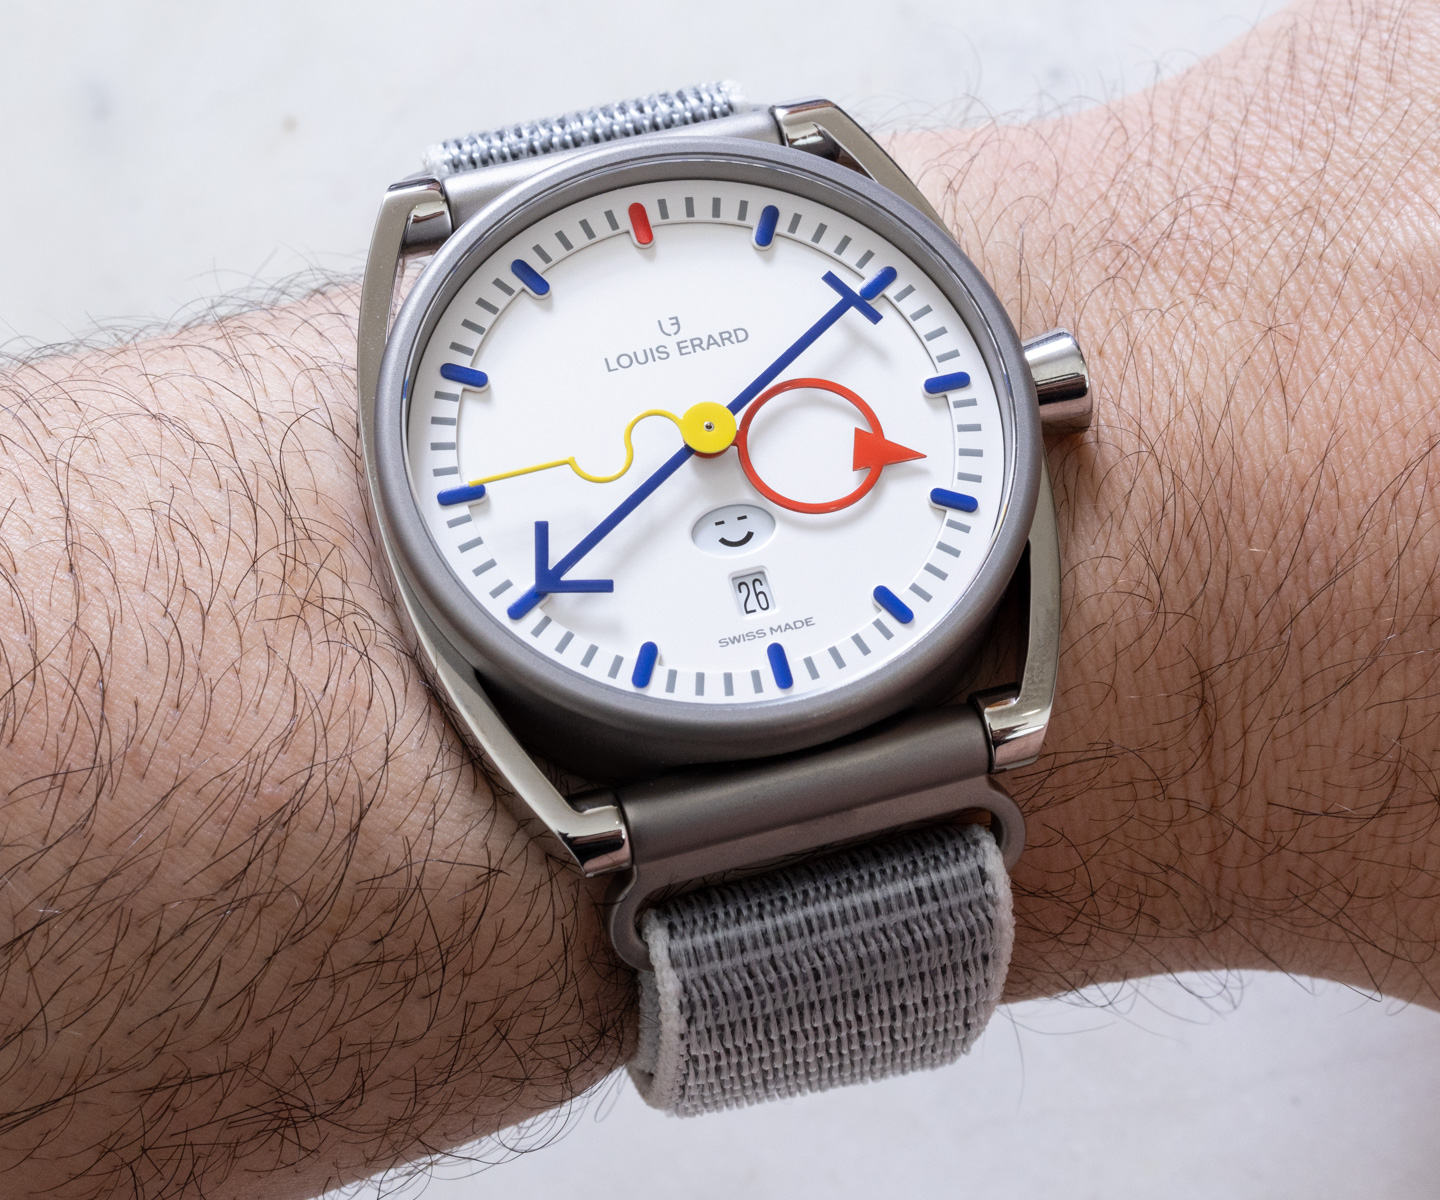 Louis Erard La Sportive Limited Edition Chronographs // Hands-On, Price